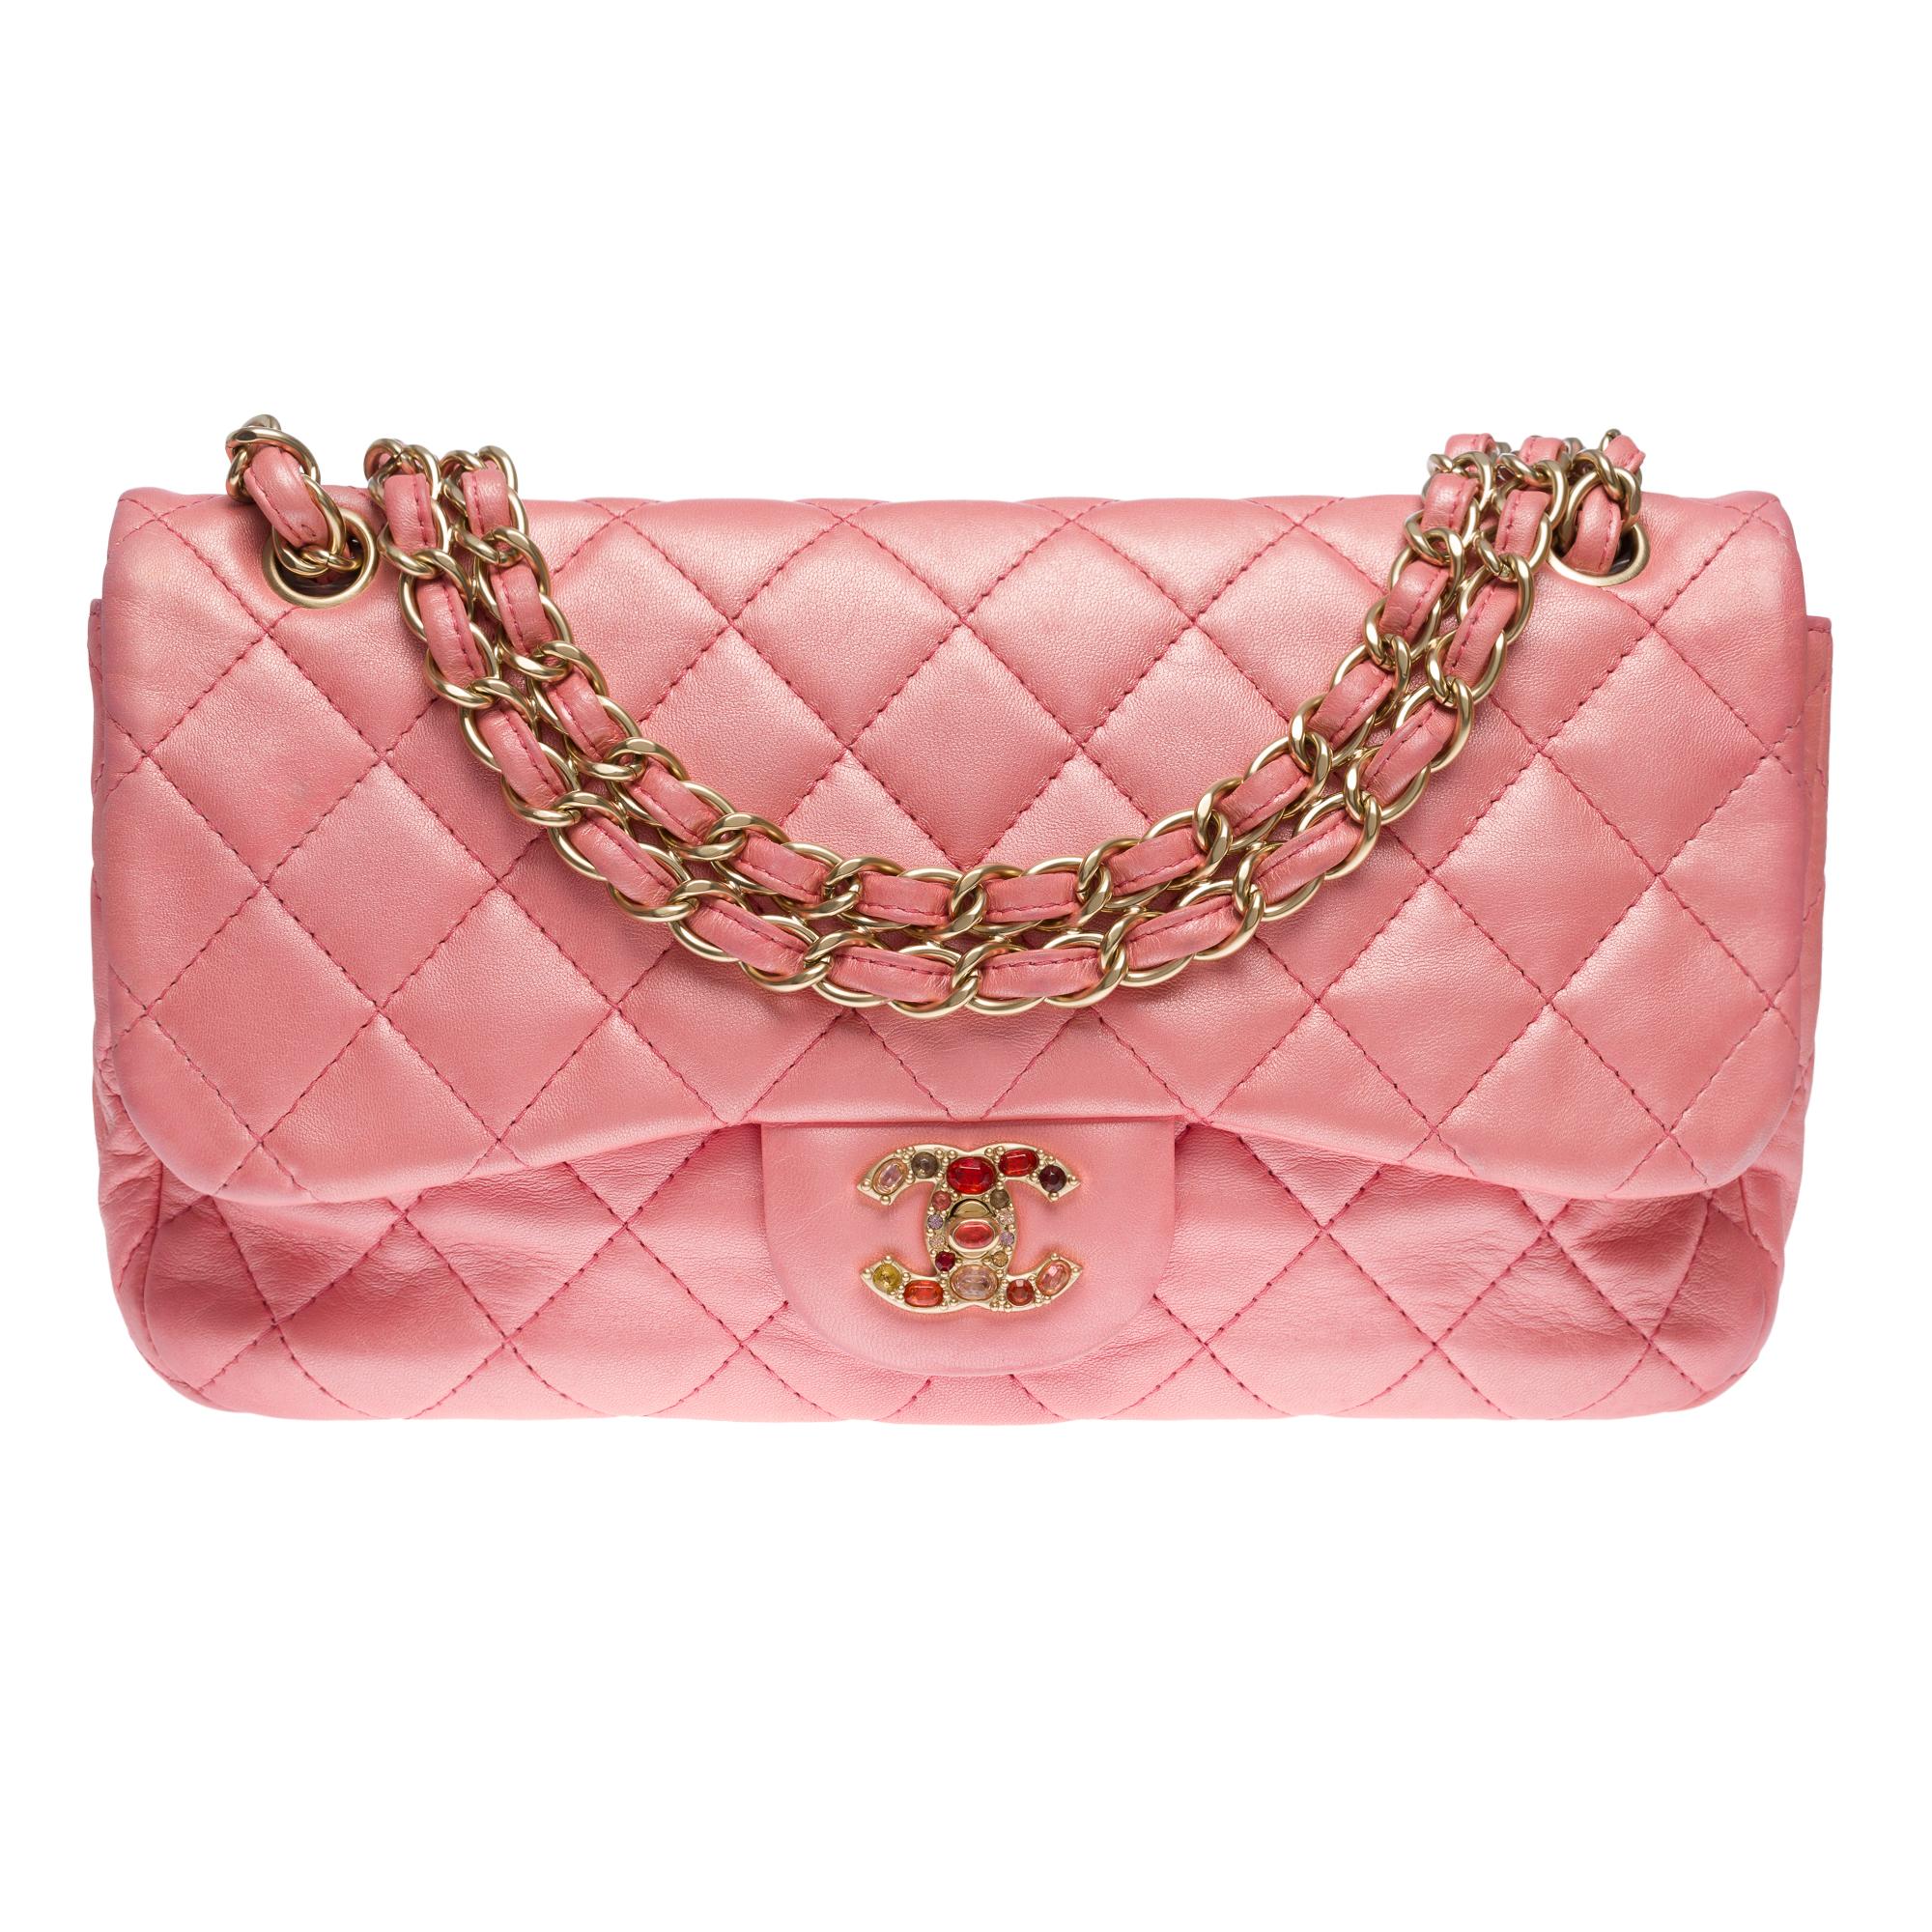 Gorgeous Chanel Classic limited edition shoulder flap bag in metallic pink quilted leather, matte gold metal hardware, gold metal chain interlaced with pink leather for a hand or shoulder carry

Flap closure
Single flap
CC in matt gold metal